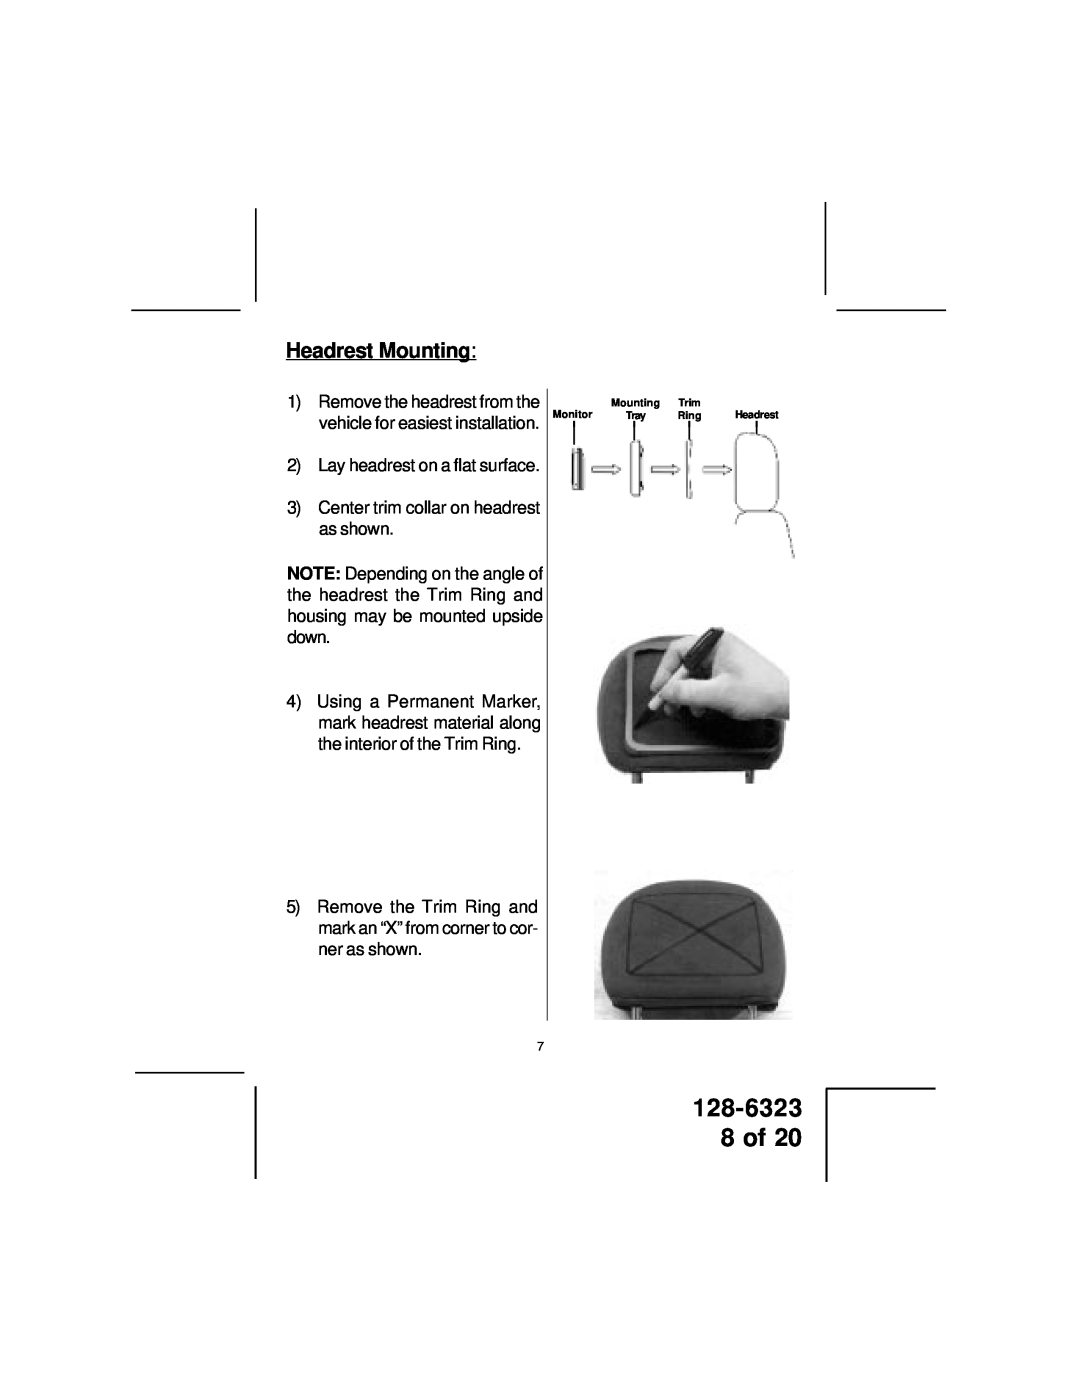 Audiovox LCM5643NP, LCM5043NP owner manual 128-6323 8 of, Headrest Mounting 